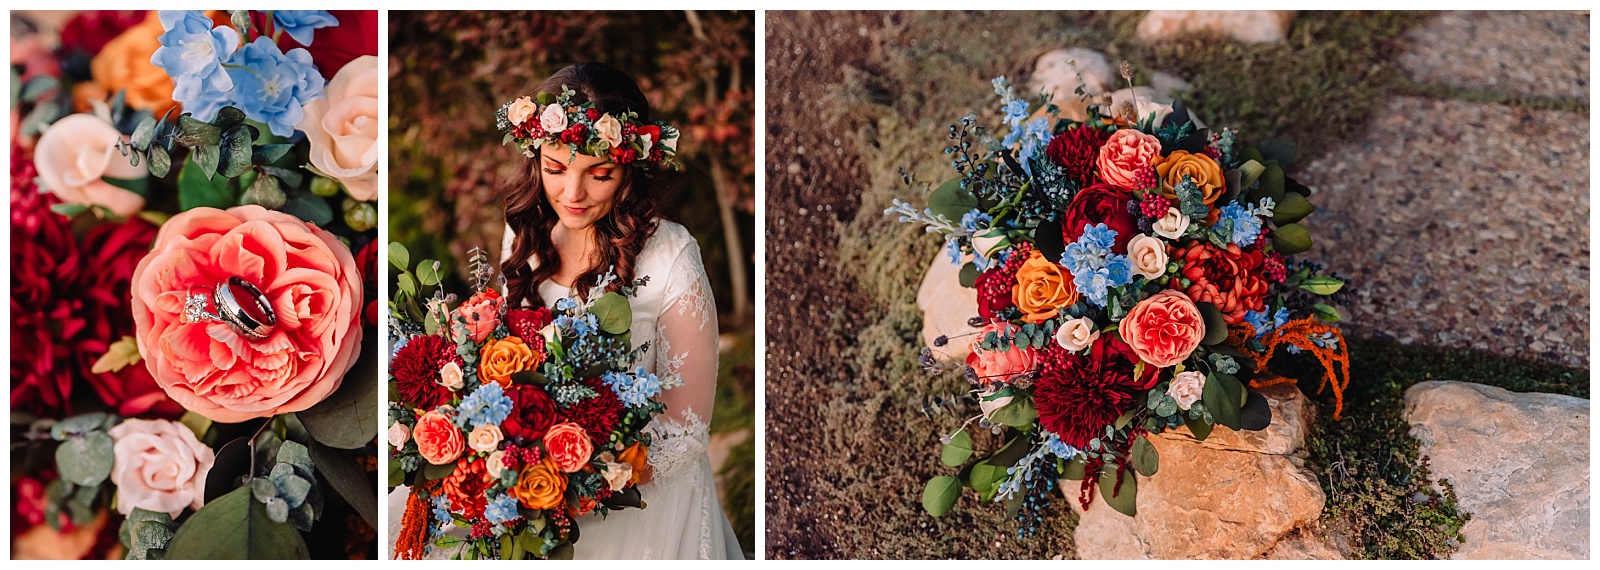 bride with wedding bouquet and flowers